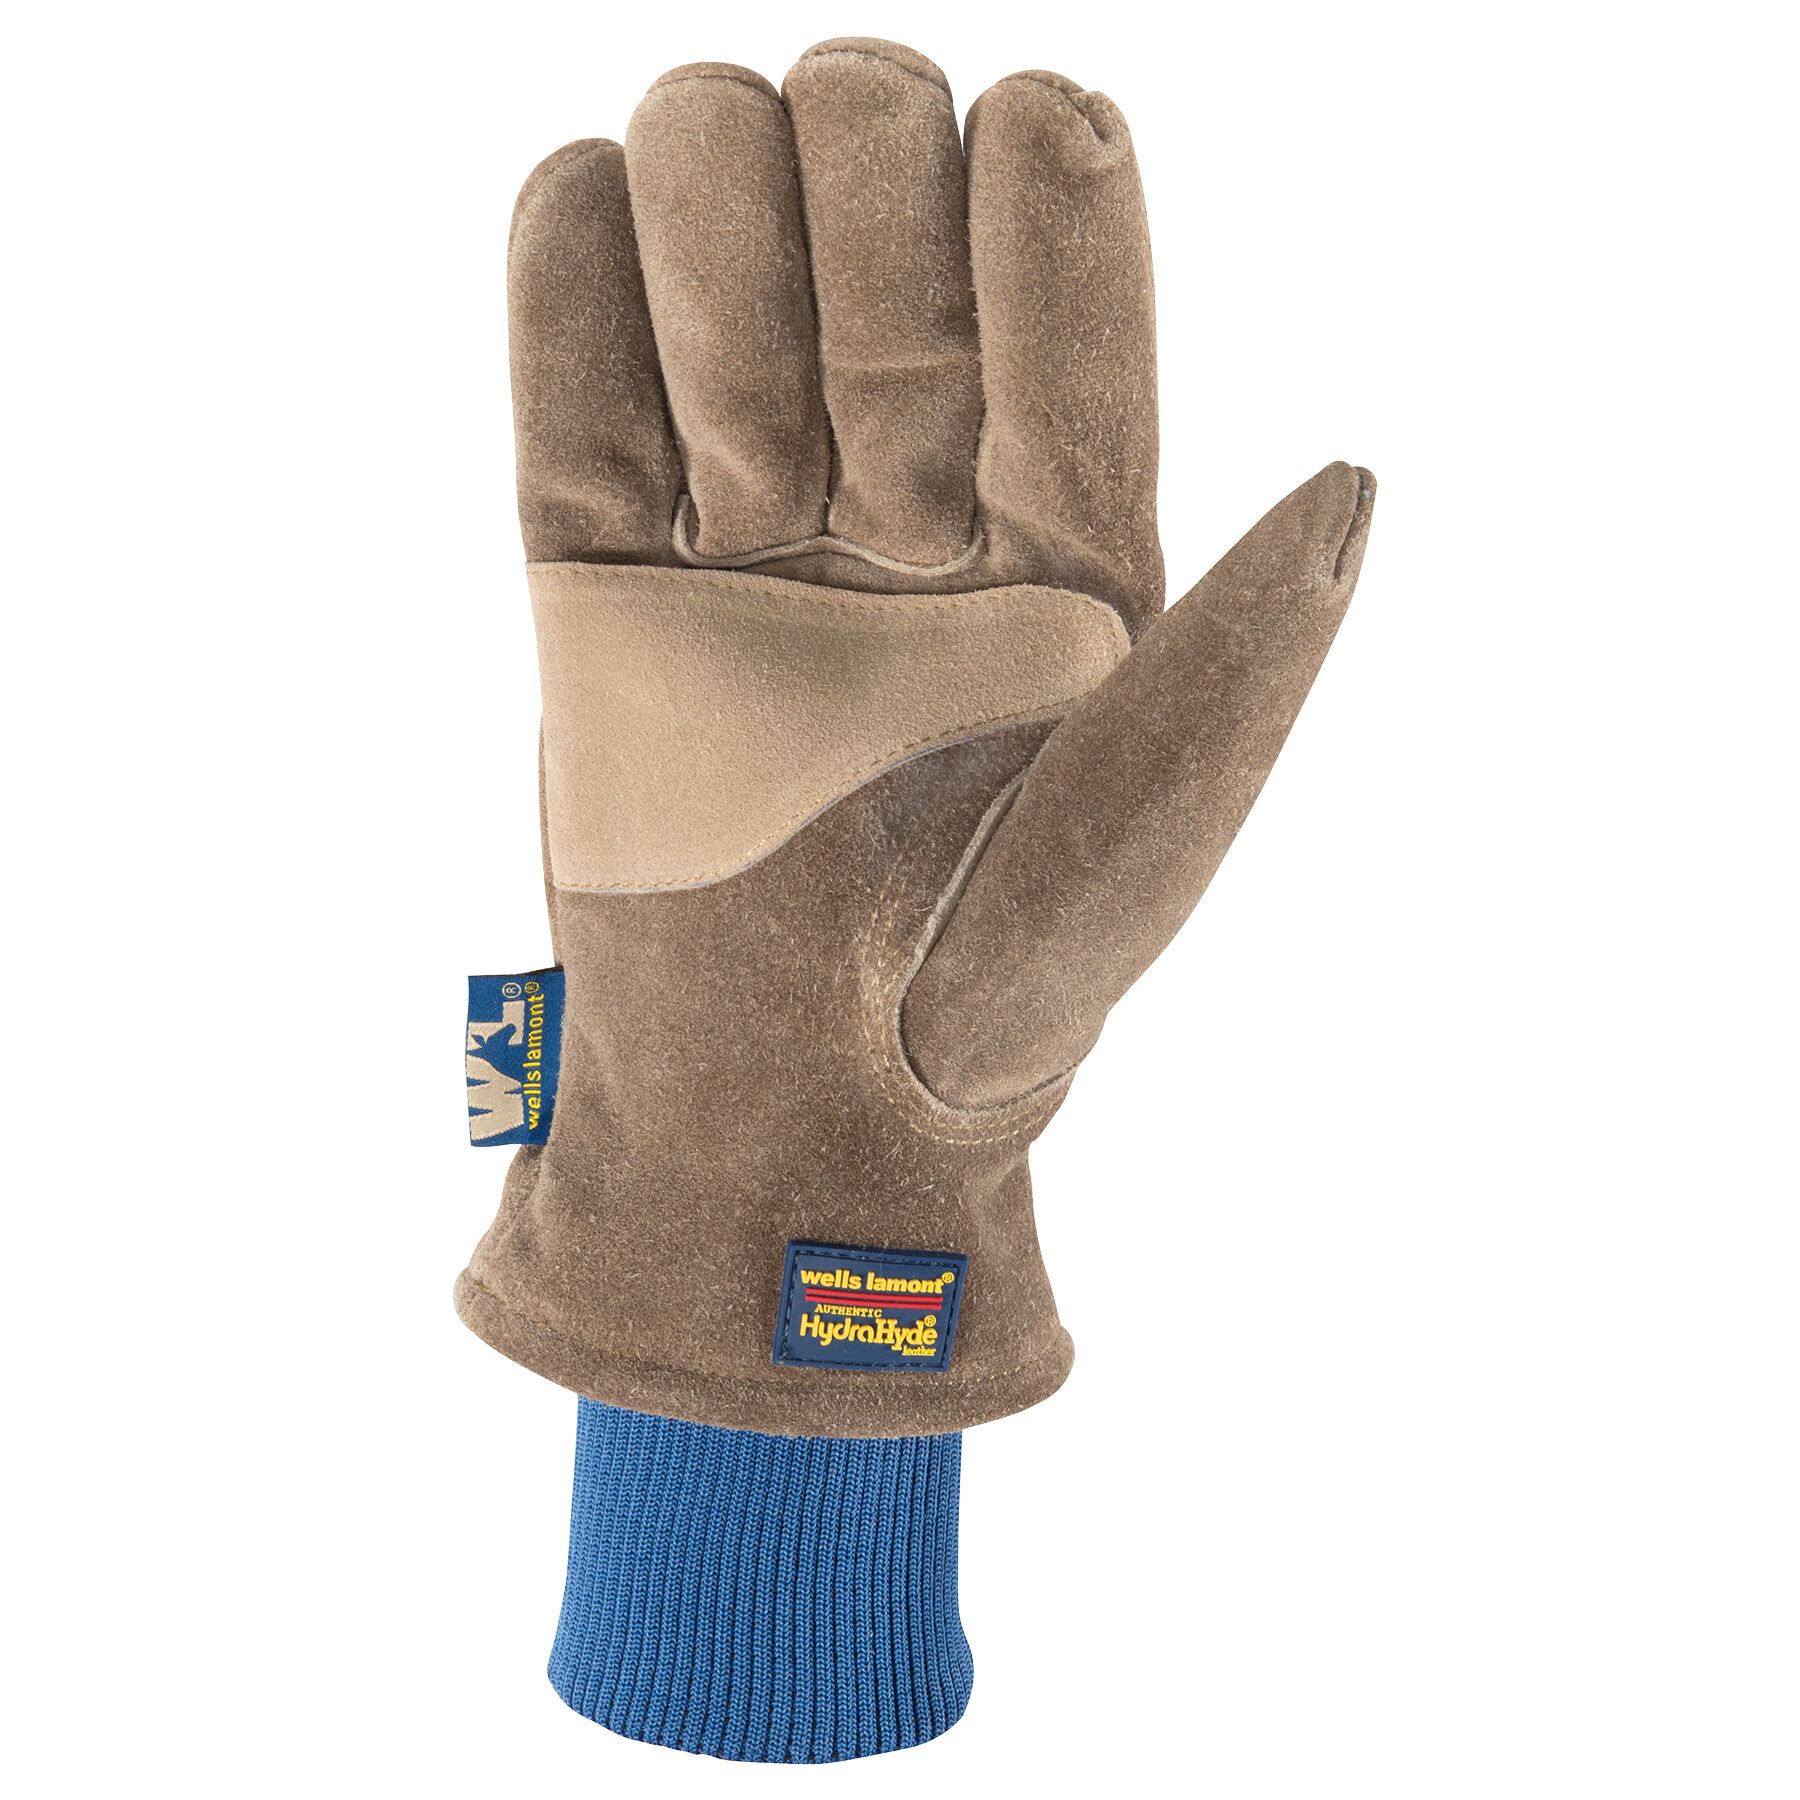 Men's Hydrahyde Insulated Suede Cowhide Gloves